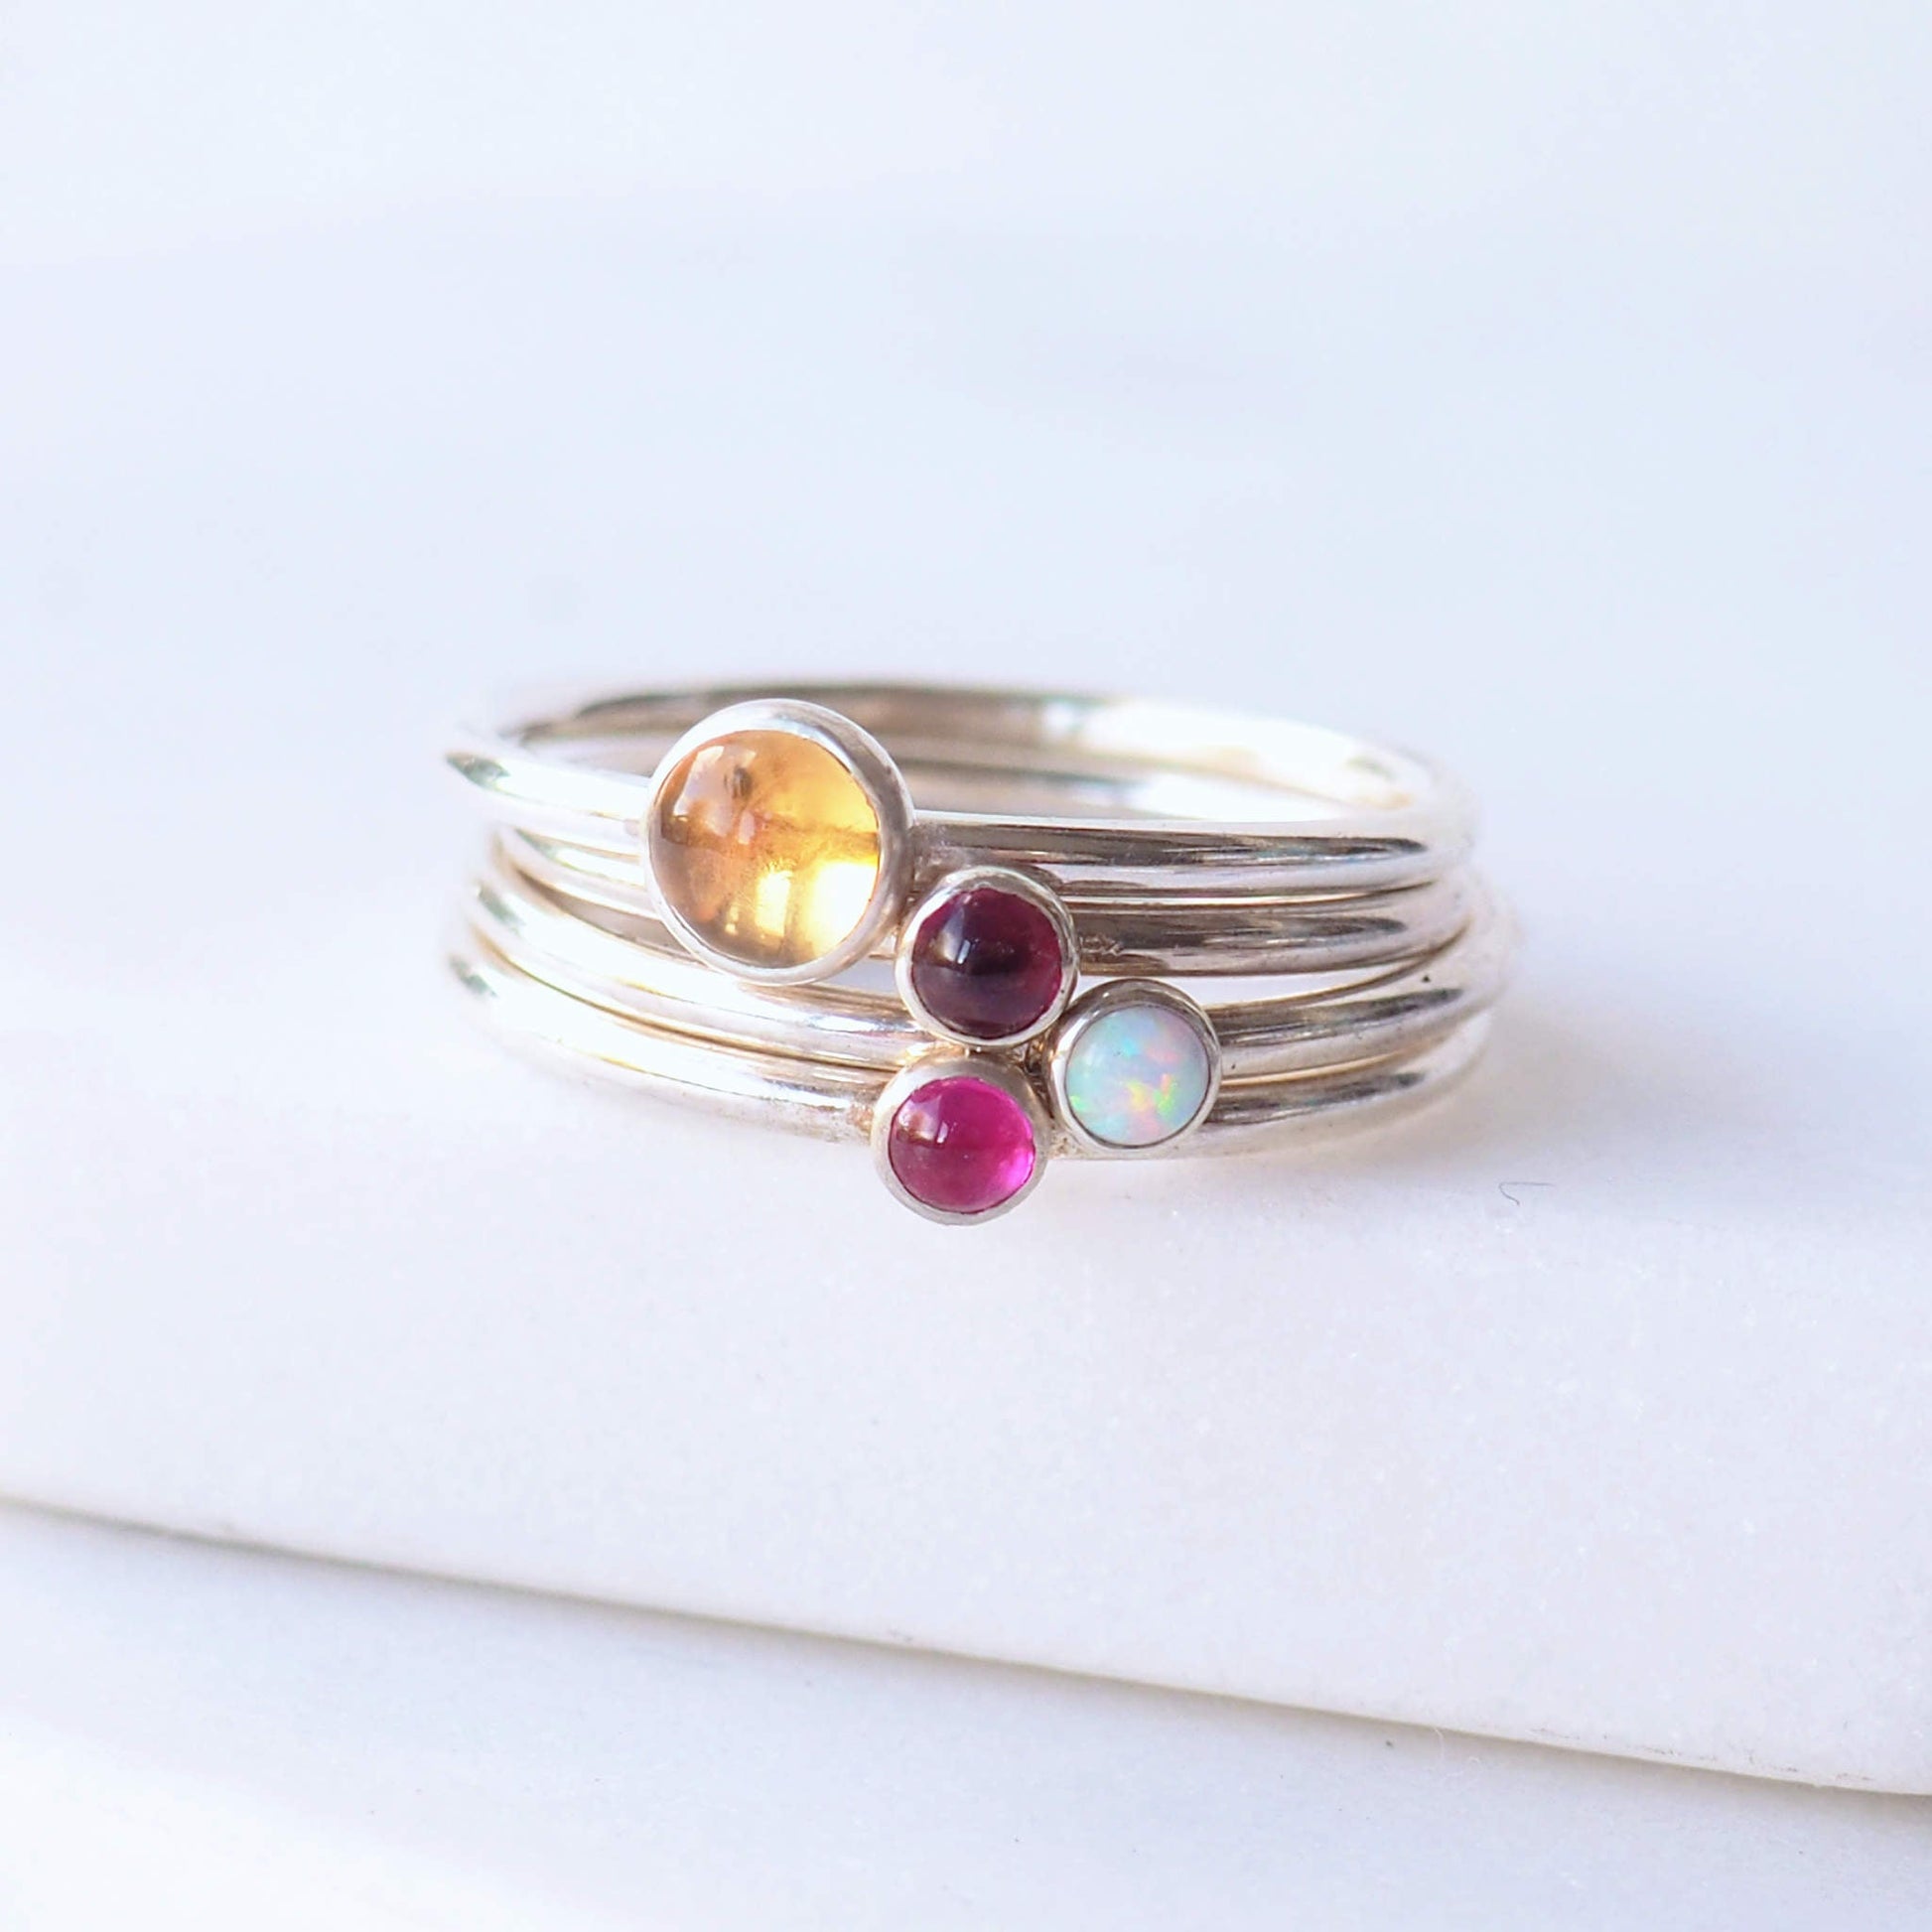 Four Silver birthstone rings with a large round Yellow Citrine for November with three additional birthstone rings of your choice, picture shows deep red garnet, pink lab ruby and white lab opal. Handmade by maram jewellery in Scotland UK